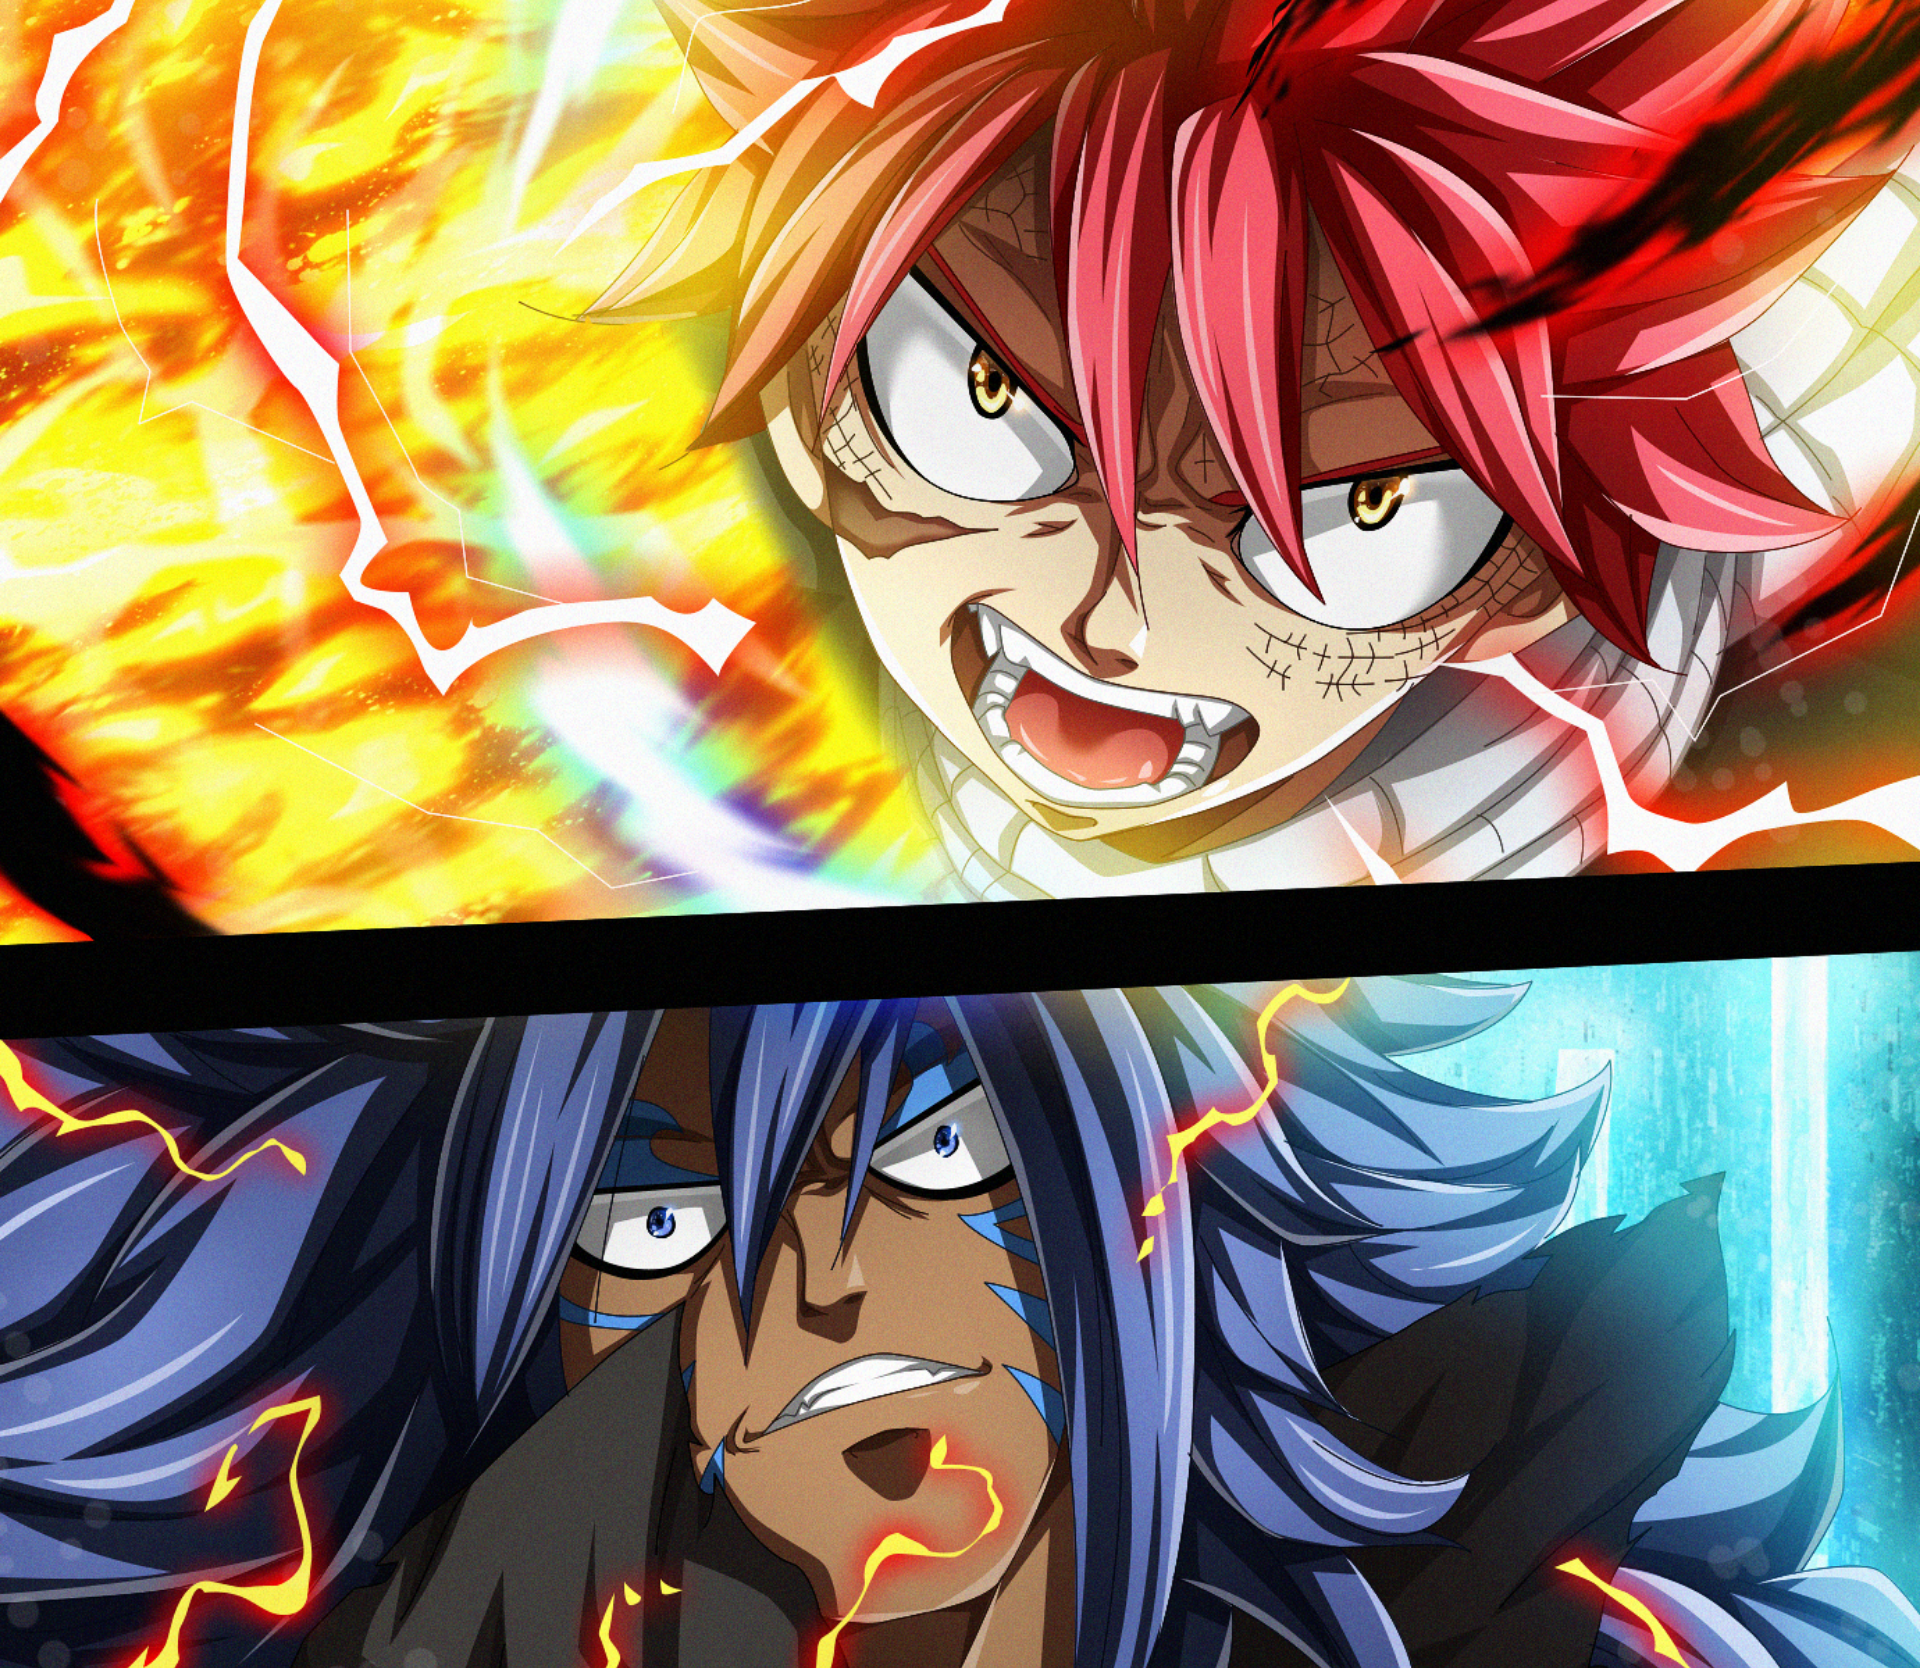 Fairy Tail 2019 Wallpapers